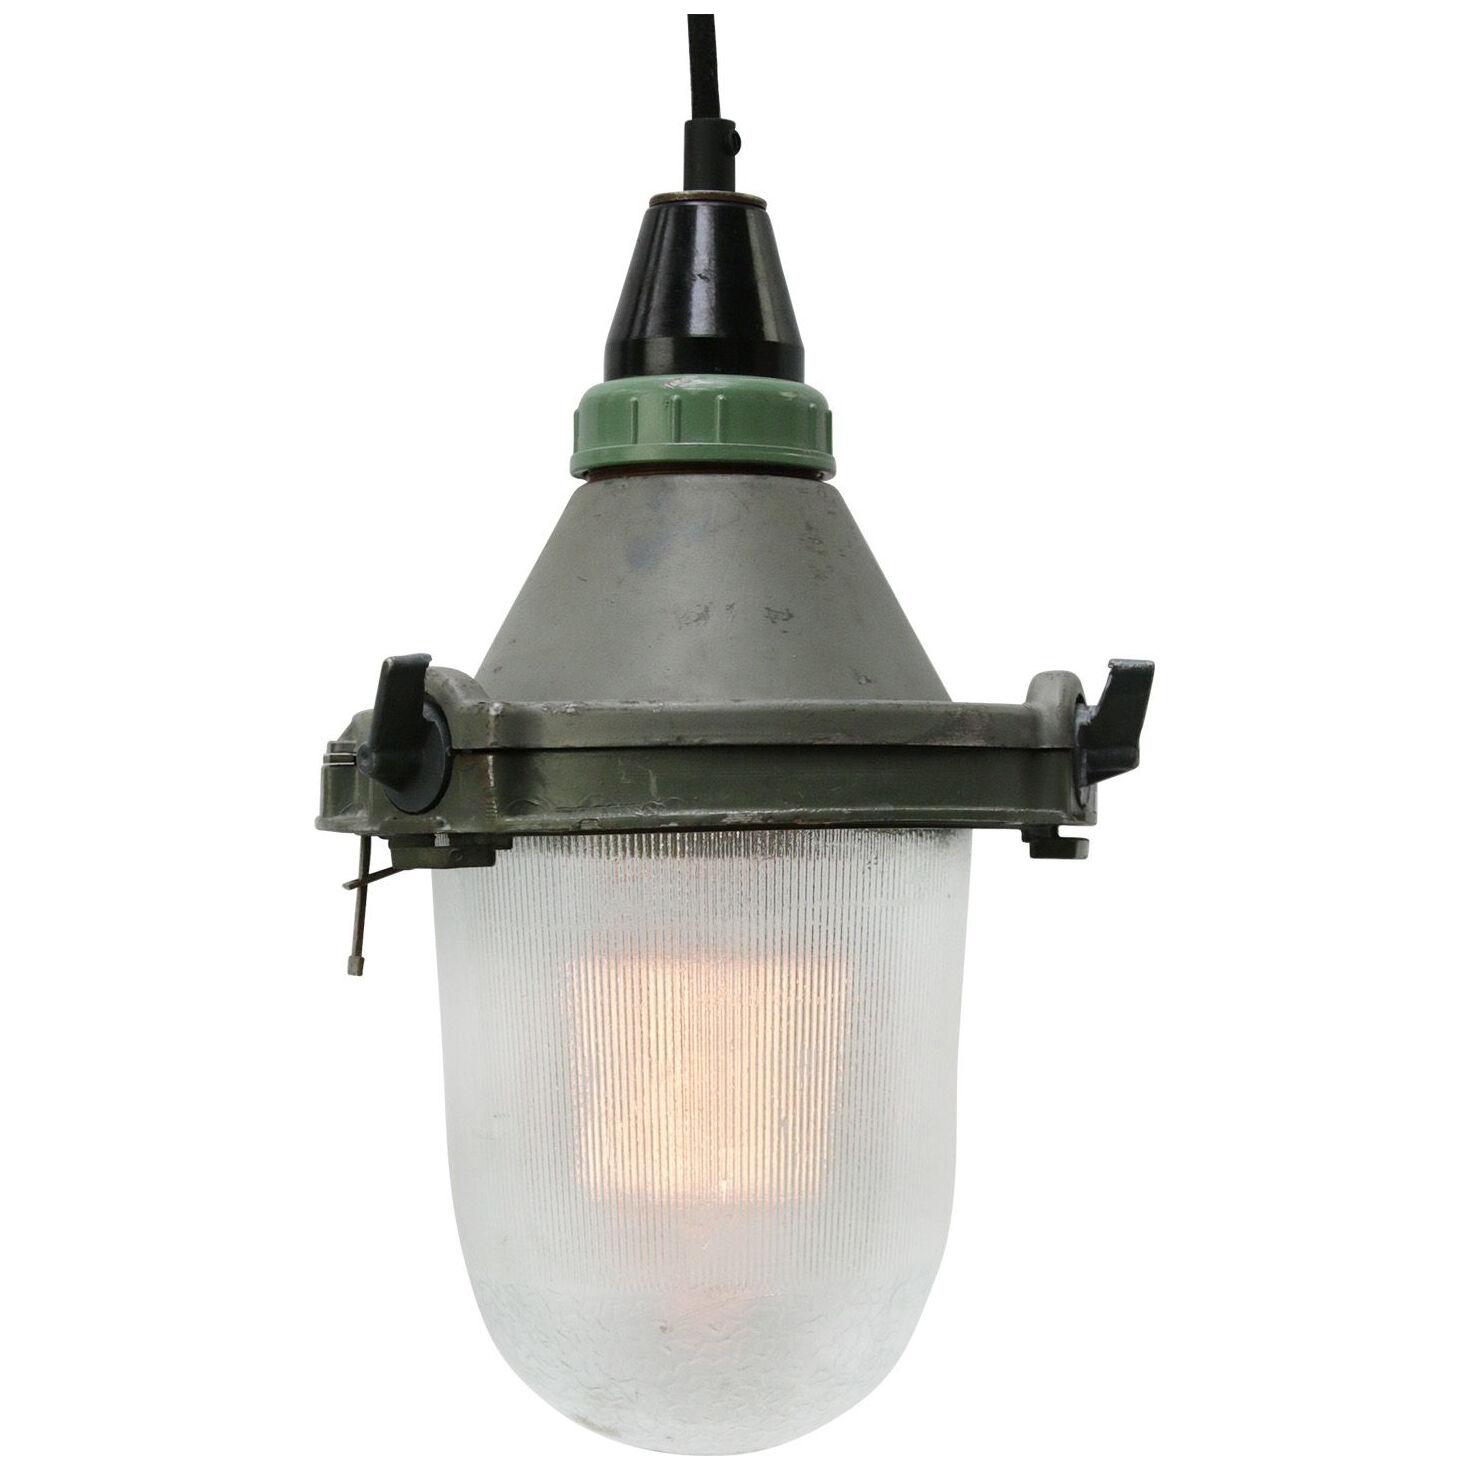 Gray Green Vintage Industrial Striped Clear Glass Pendant Light